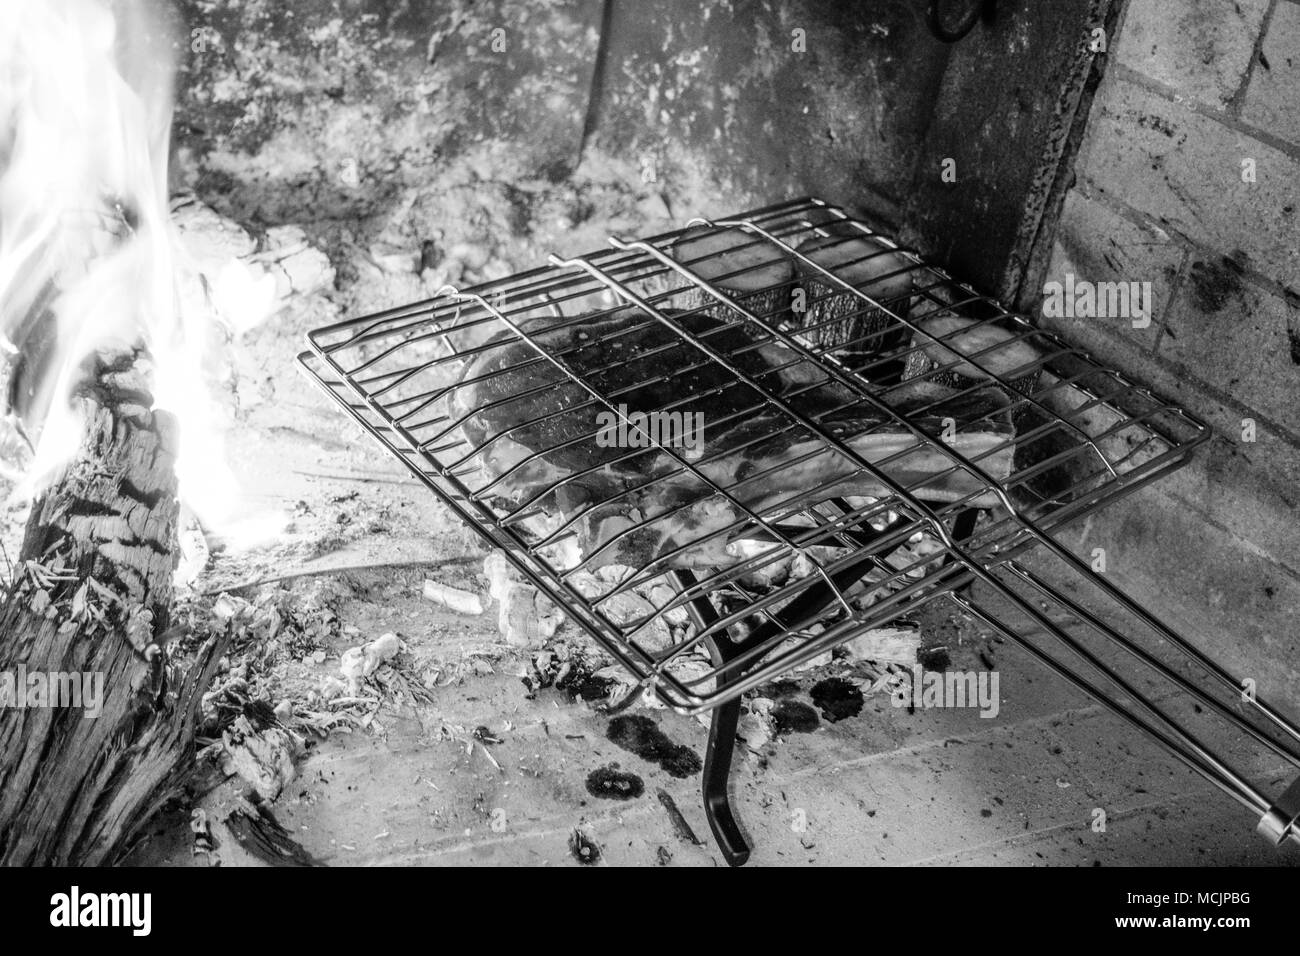 View of metal grate inside of the fireplace, Greece Stock Photo